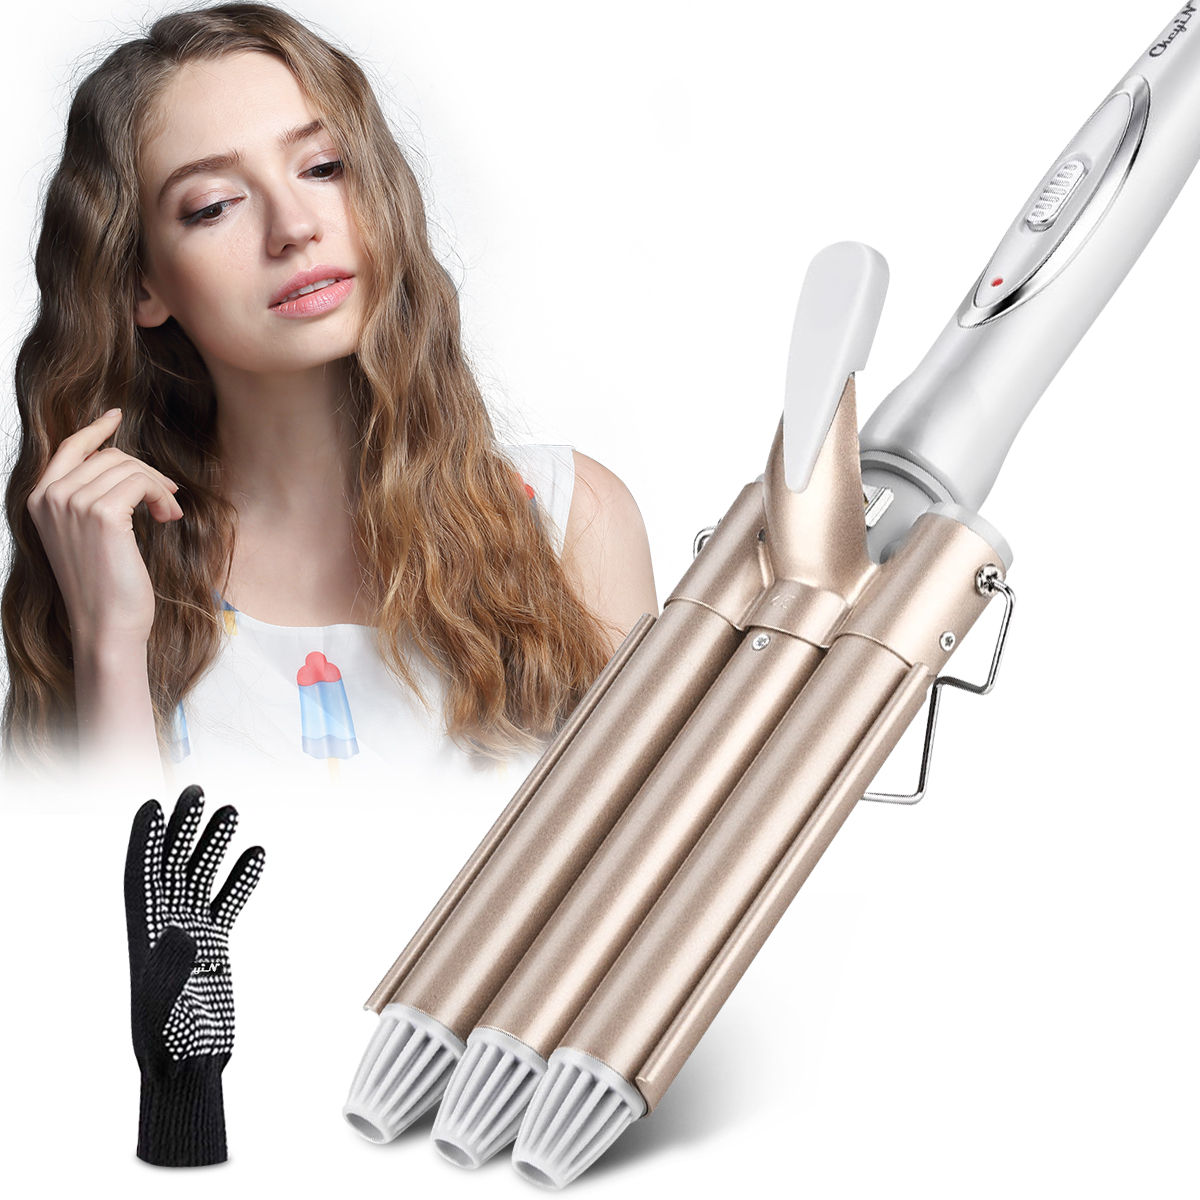 CkeyiN 3 Barrel Curling Iron Wand With 1 Heat Resistant Glove